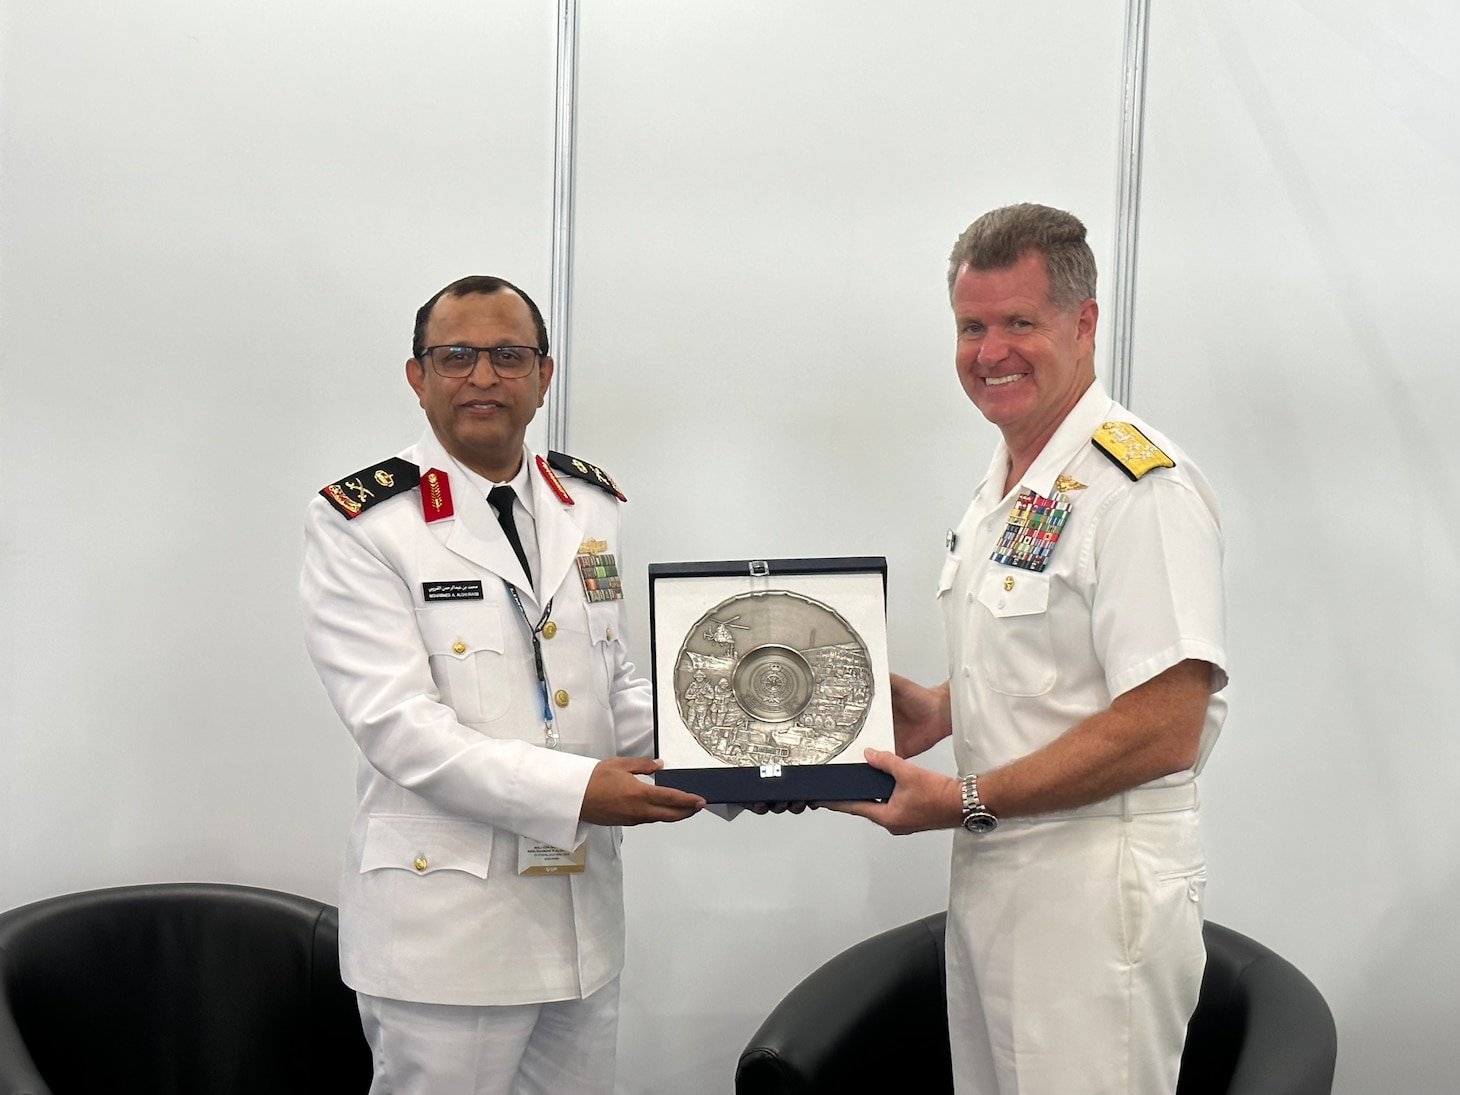 Rear Adm. Mohammed bin Abdirahman AI-Ghuraybi, deputy commander, Royal Saudi Naval Forces, and Adm. Samuel Paparo, commander, U.S. Pacific Fleet, pose for a photo during a bilateral meeting at Langkawi International Maritime and Aerospace Exhibition 2023 in Langkawi, Malaysia, May 24, 2023. The visit to Malaysia underscored the United States’ commitment to strengthening alliances and partnerships for an enduring resilient, free and open Indo-Pacific. (Photo courtesy of U.S. Navy)